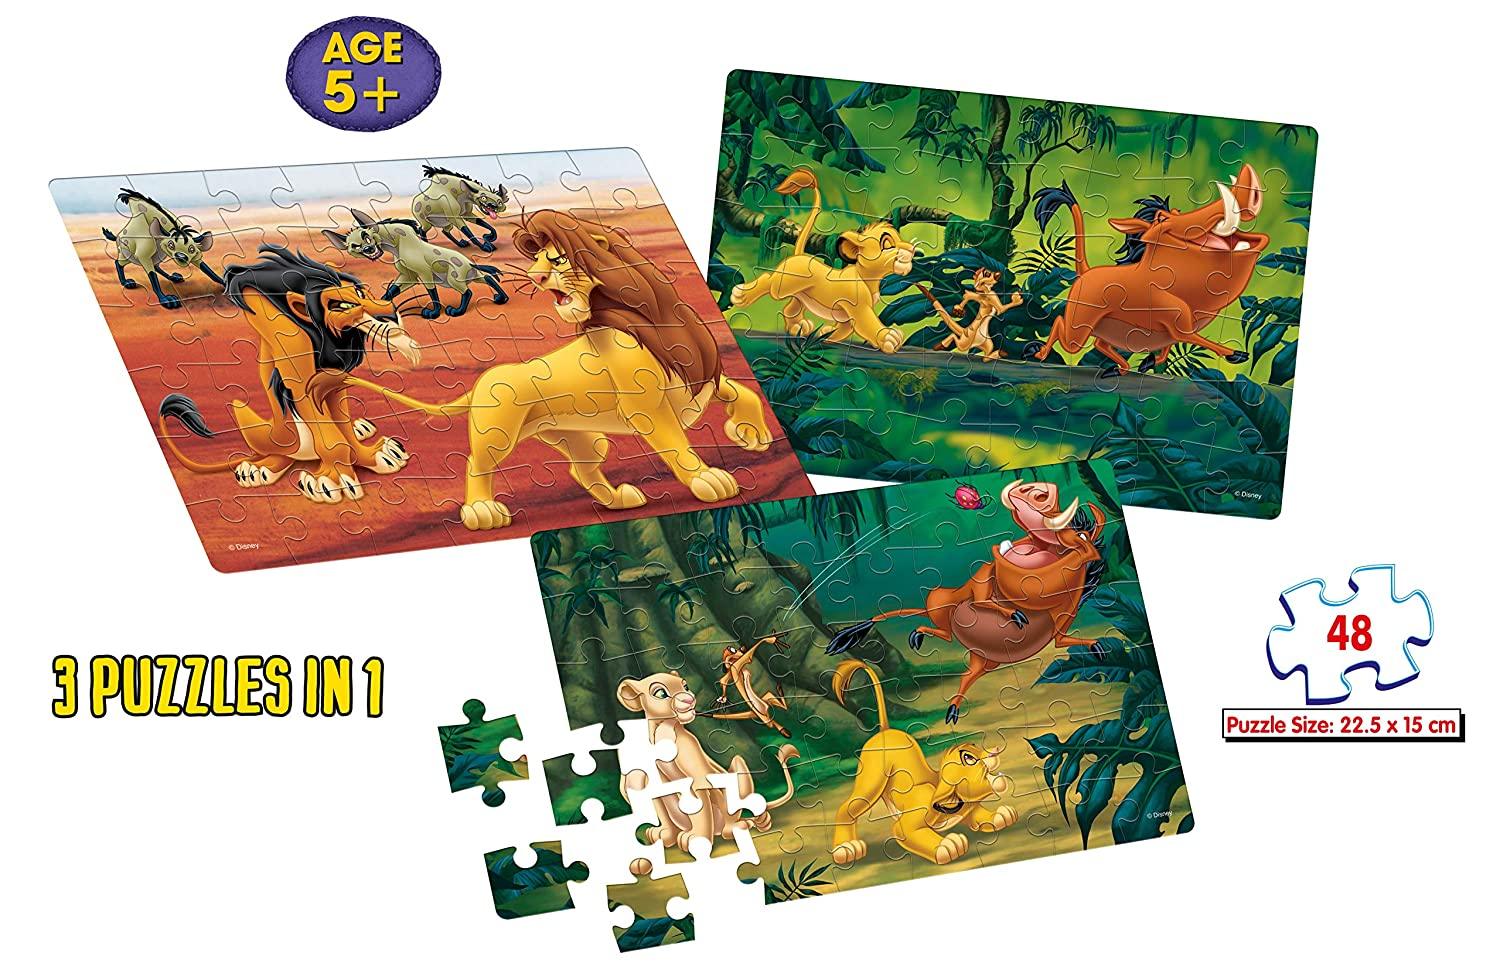 Frank Disney The Lion King 3 Puzzles in 1 - A Set of 3 48 Pc Jigsaw Puzzles for 5 Year Old Kids and Above